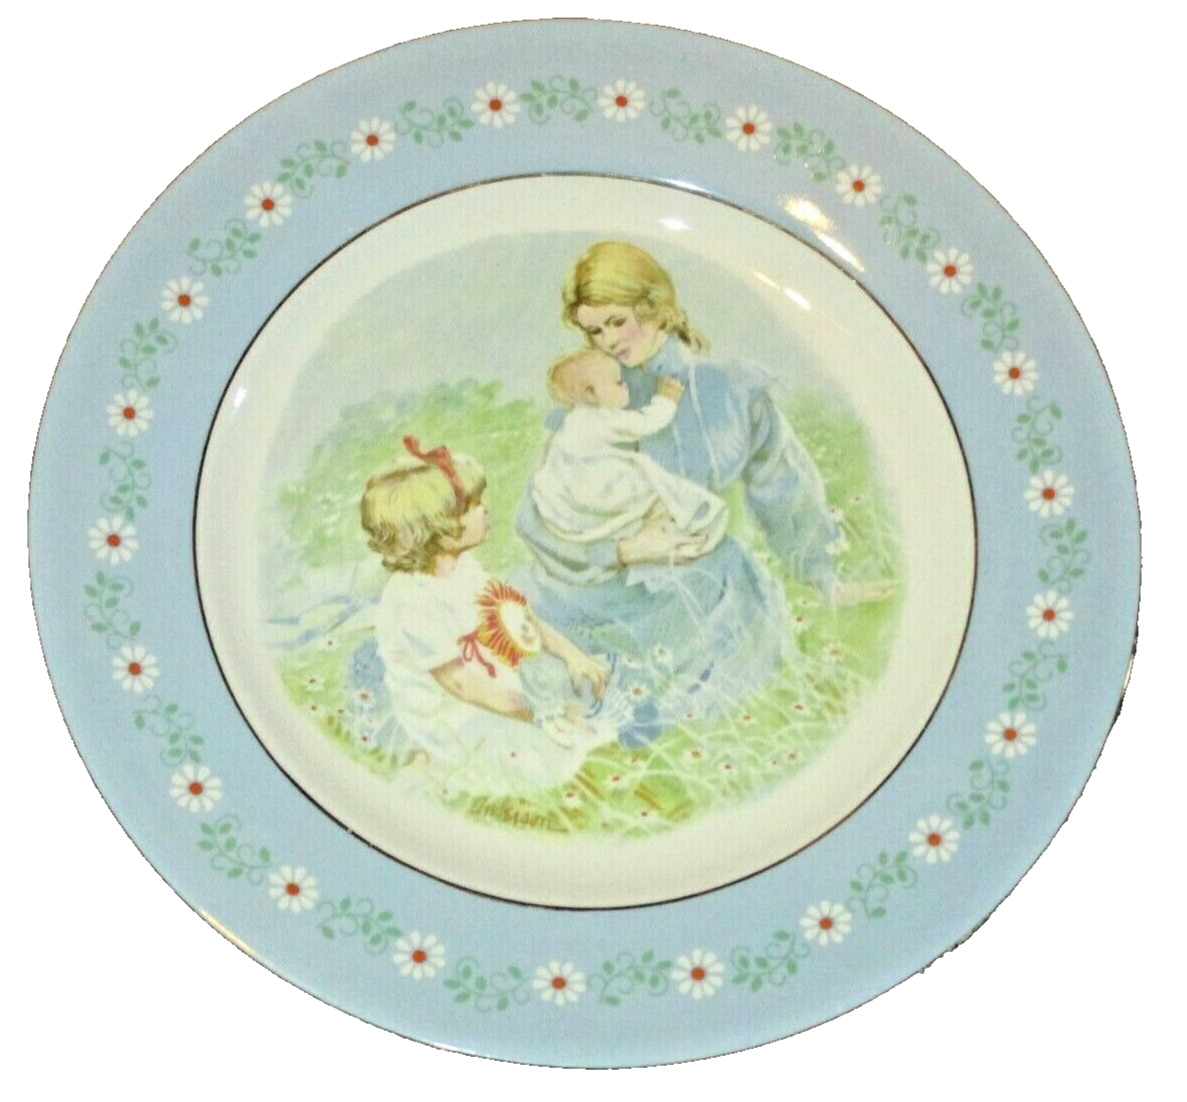 AVON Mother's Day Collector Plate (1974) TENDERNESS